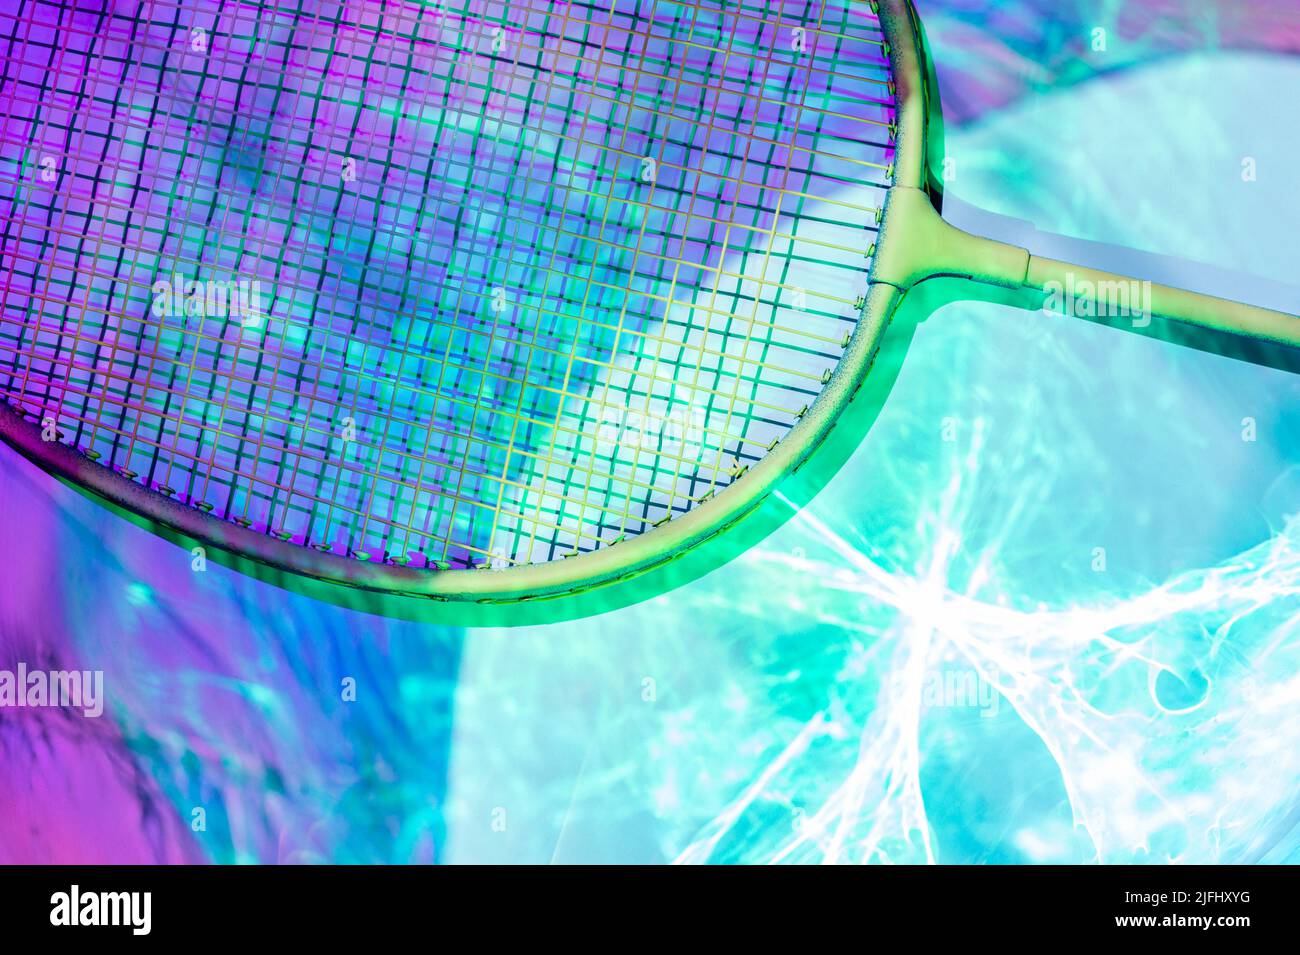 Badminton racket on holographic colors background. Horizontal sport theme poster, greeting cards, headers, website and app Stock Photo